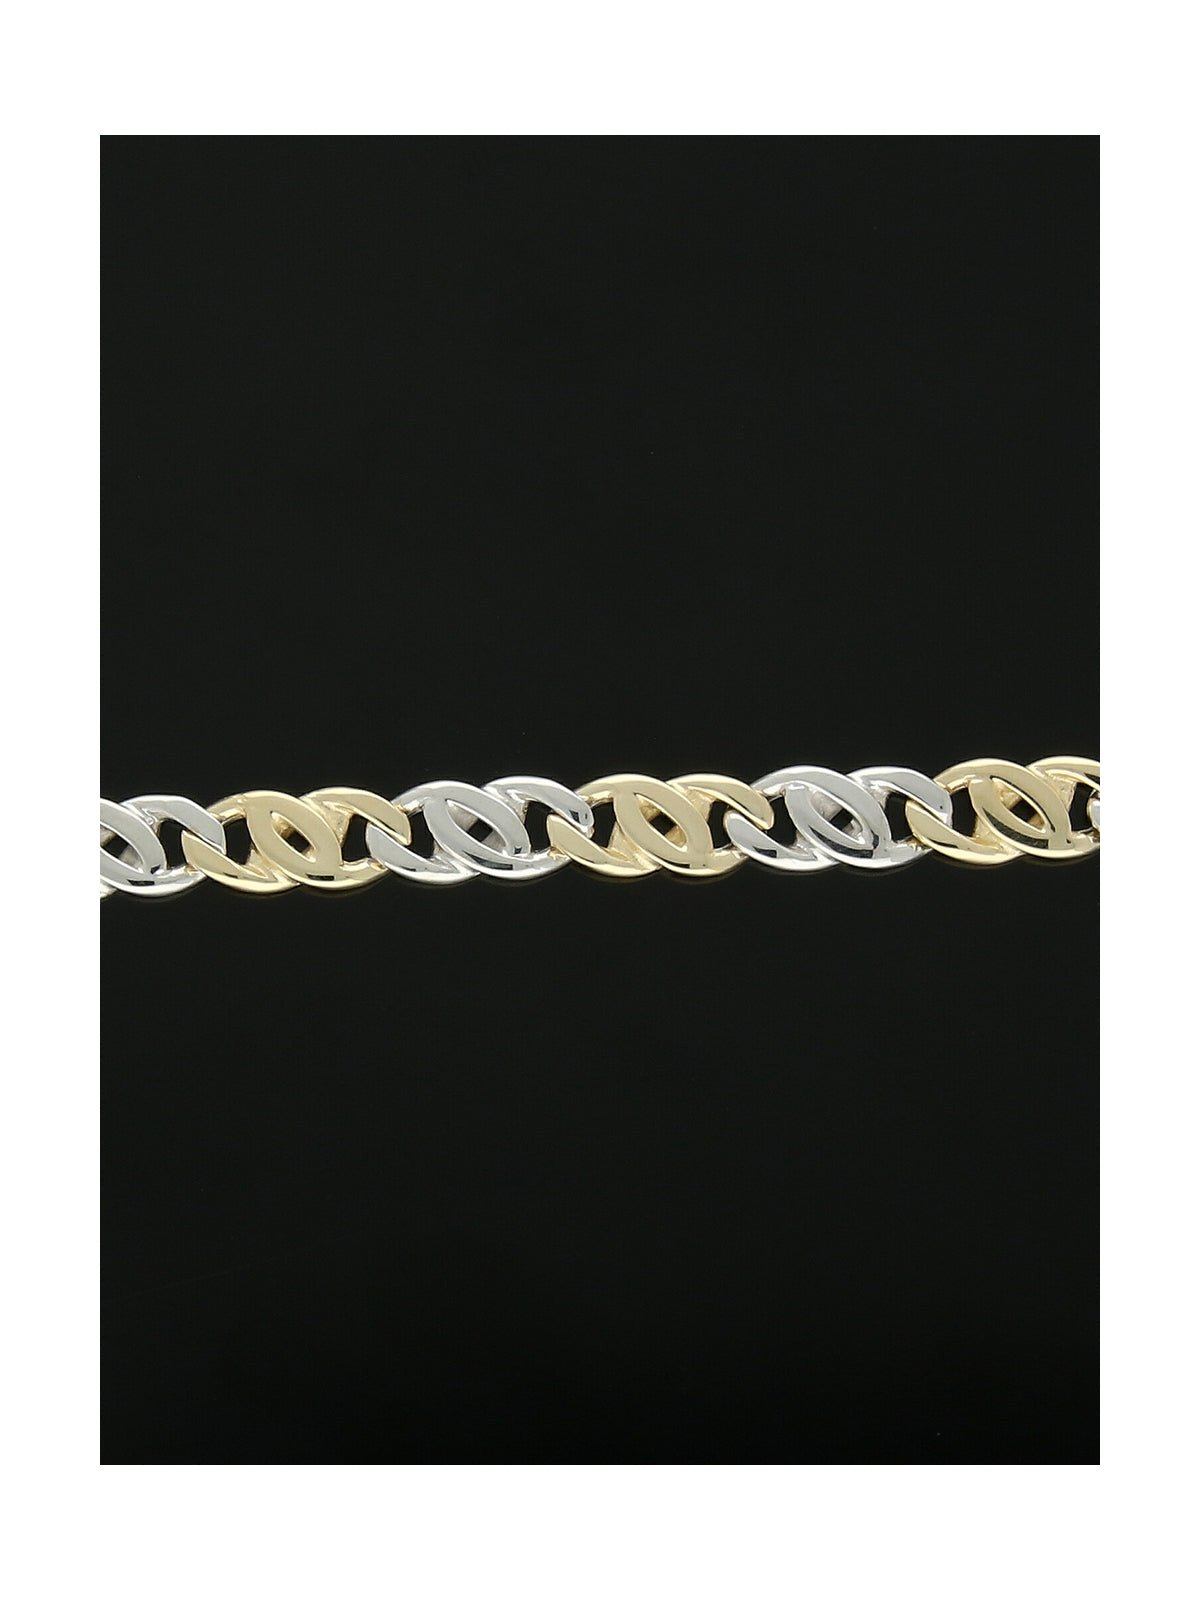 Alternating Double Curb Link Bracelet in 9ct Yellow and White Gold